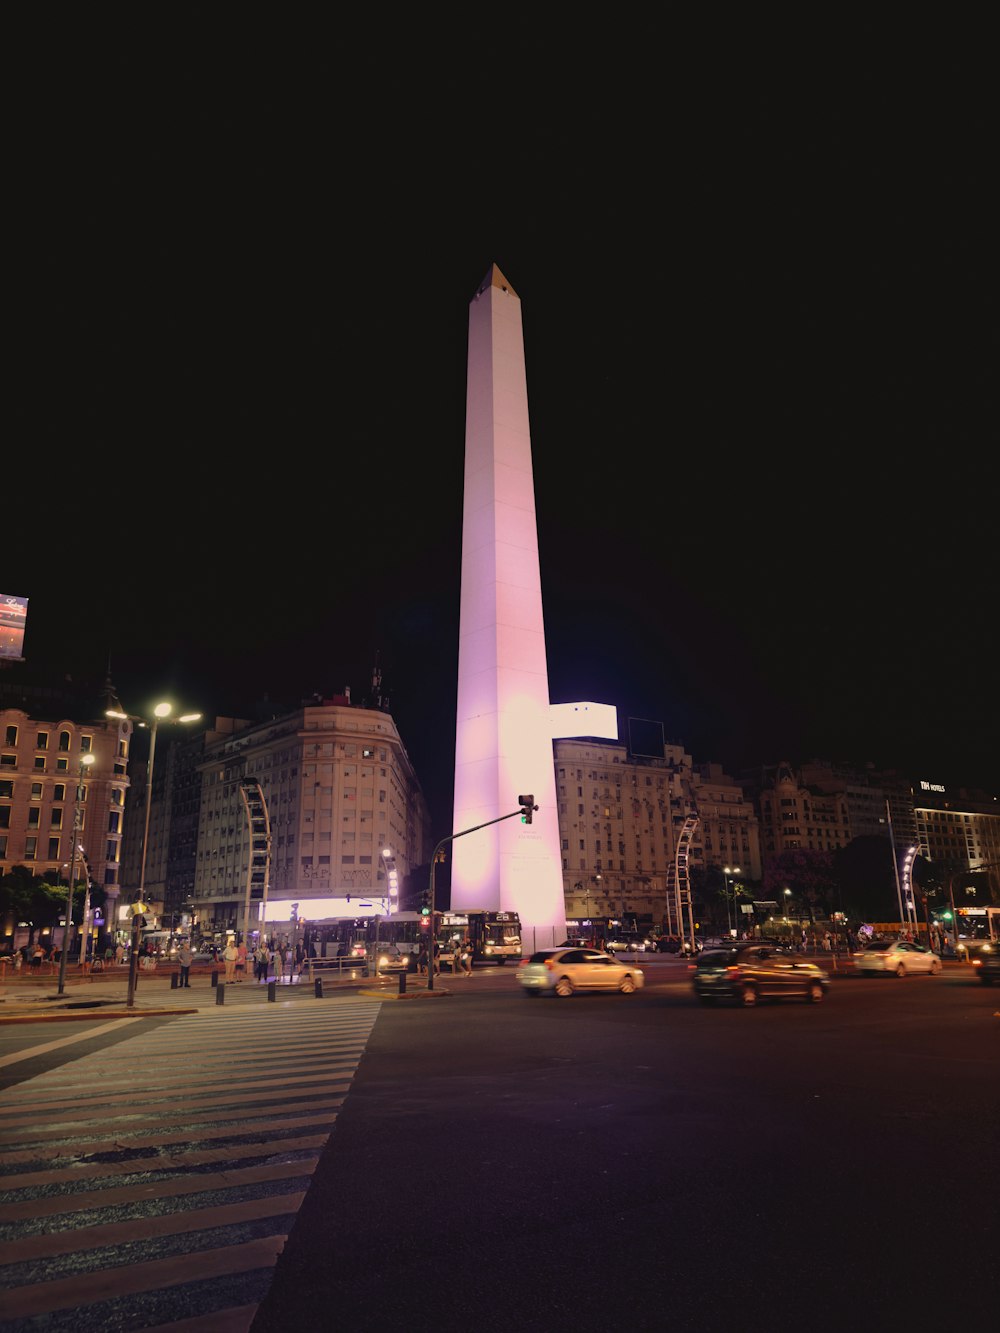 a tall obelisk lit up at night in a city